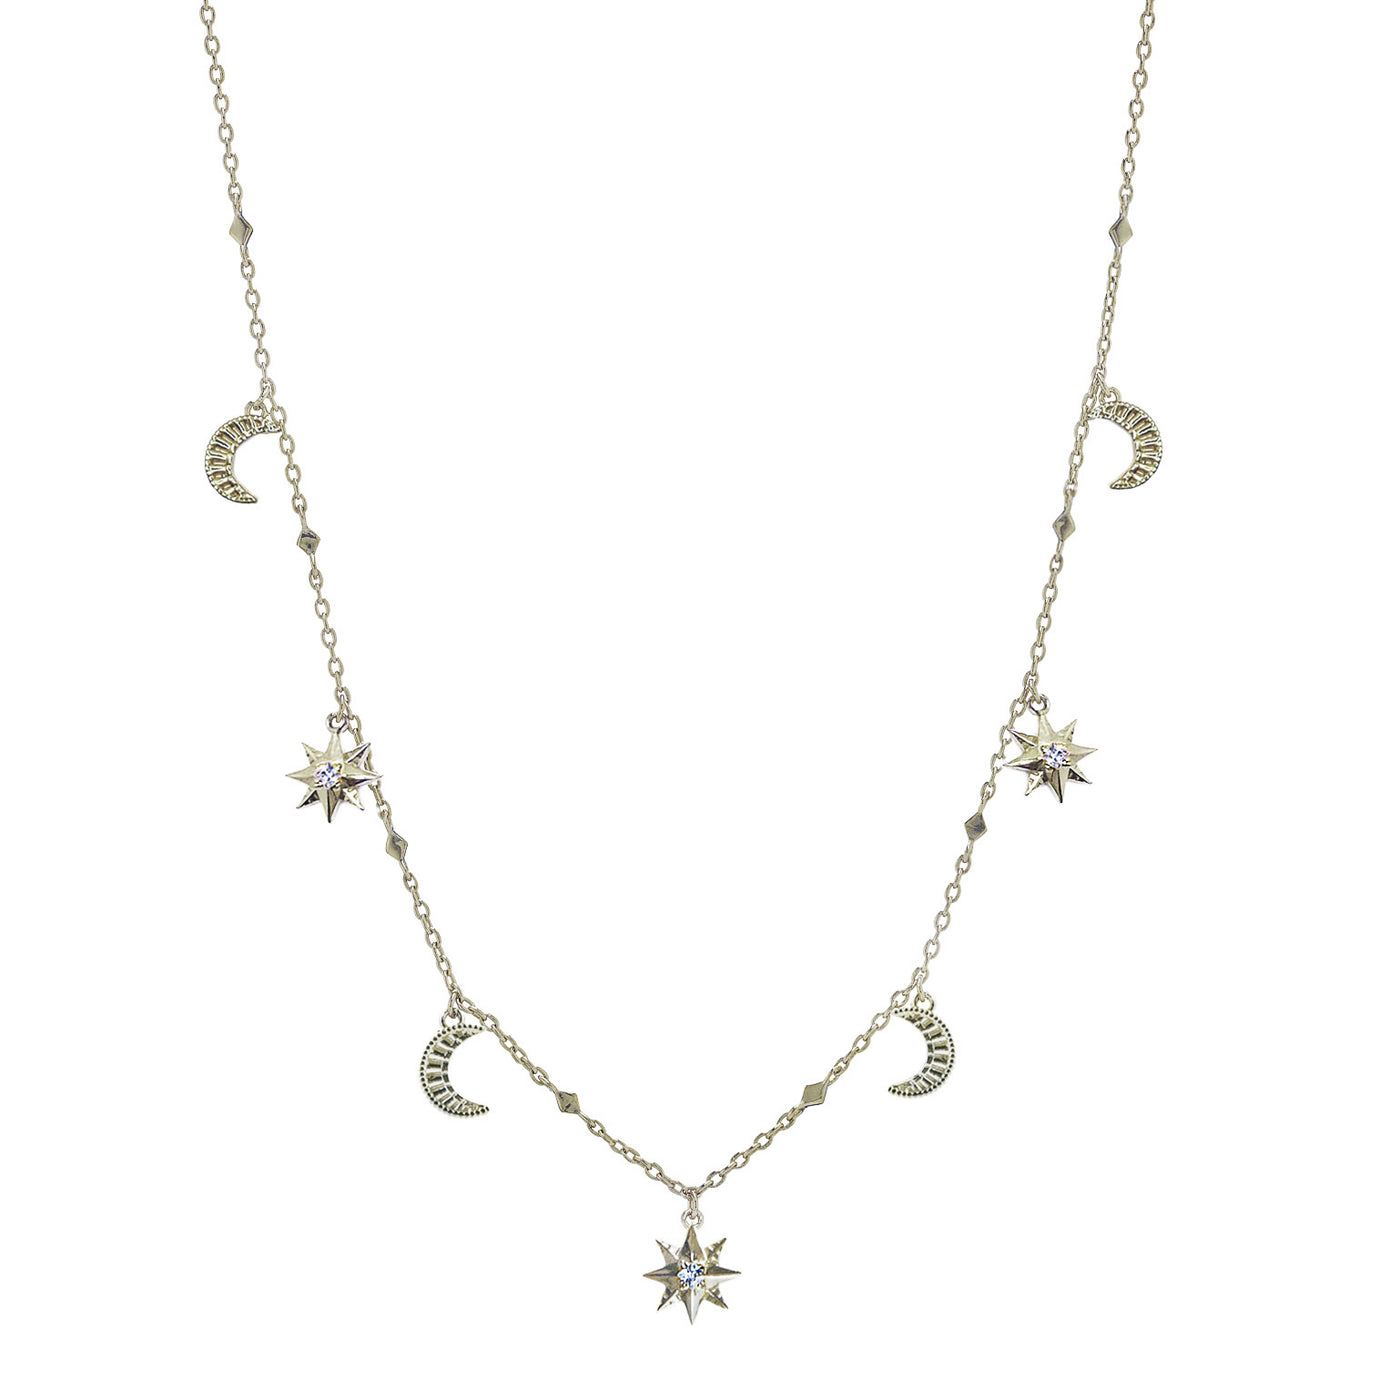 Sterling silver moon and star choker necklace with CZ crystals